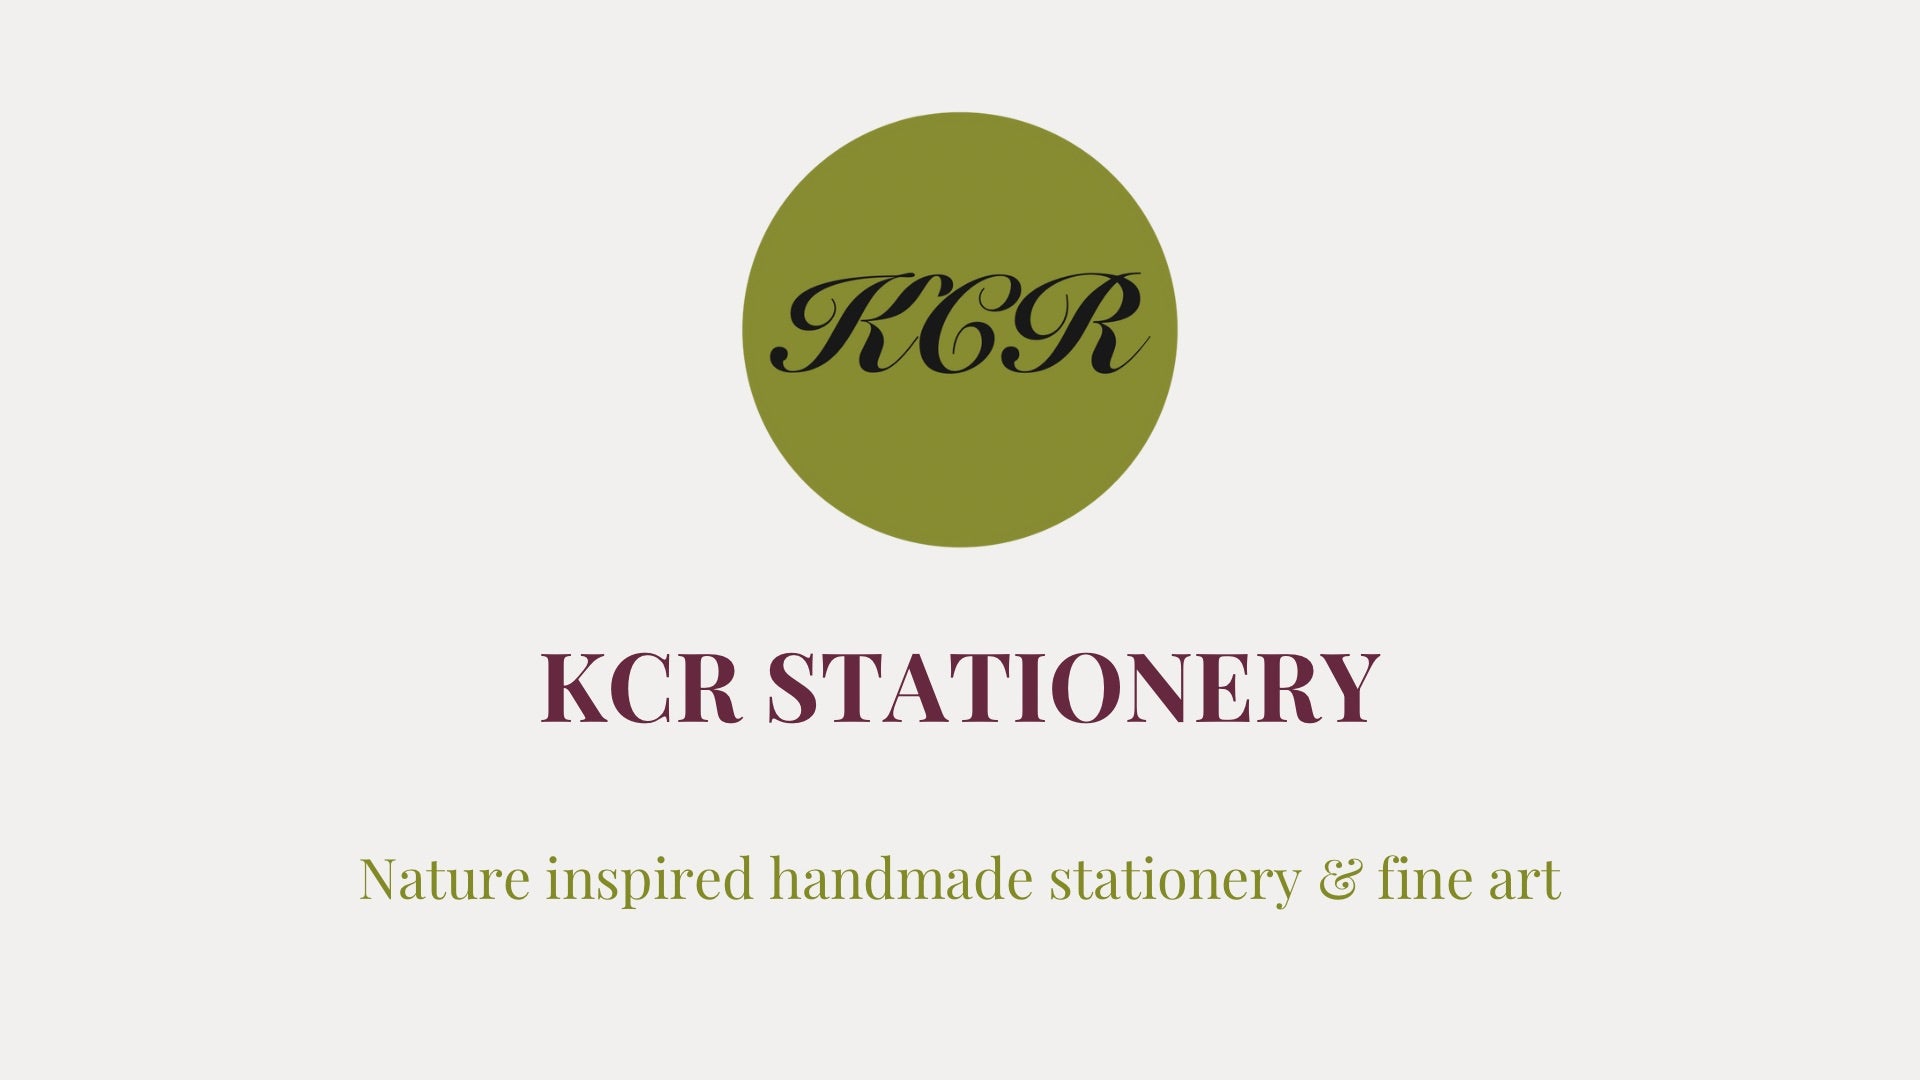 Load video: Introduction to KCR Stationery artist Kat, and the story behind the hand made eco friendly stationery brand